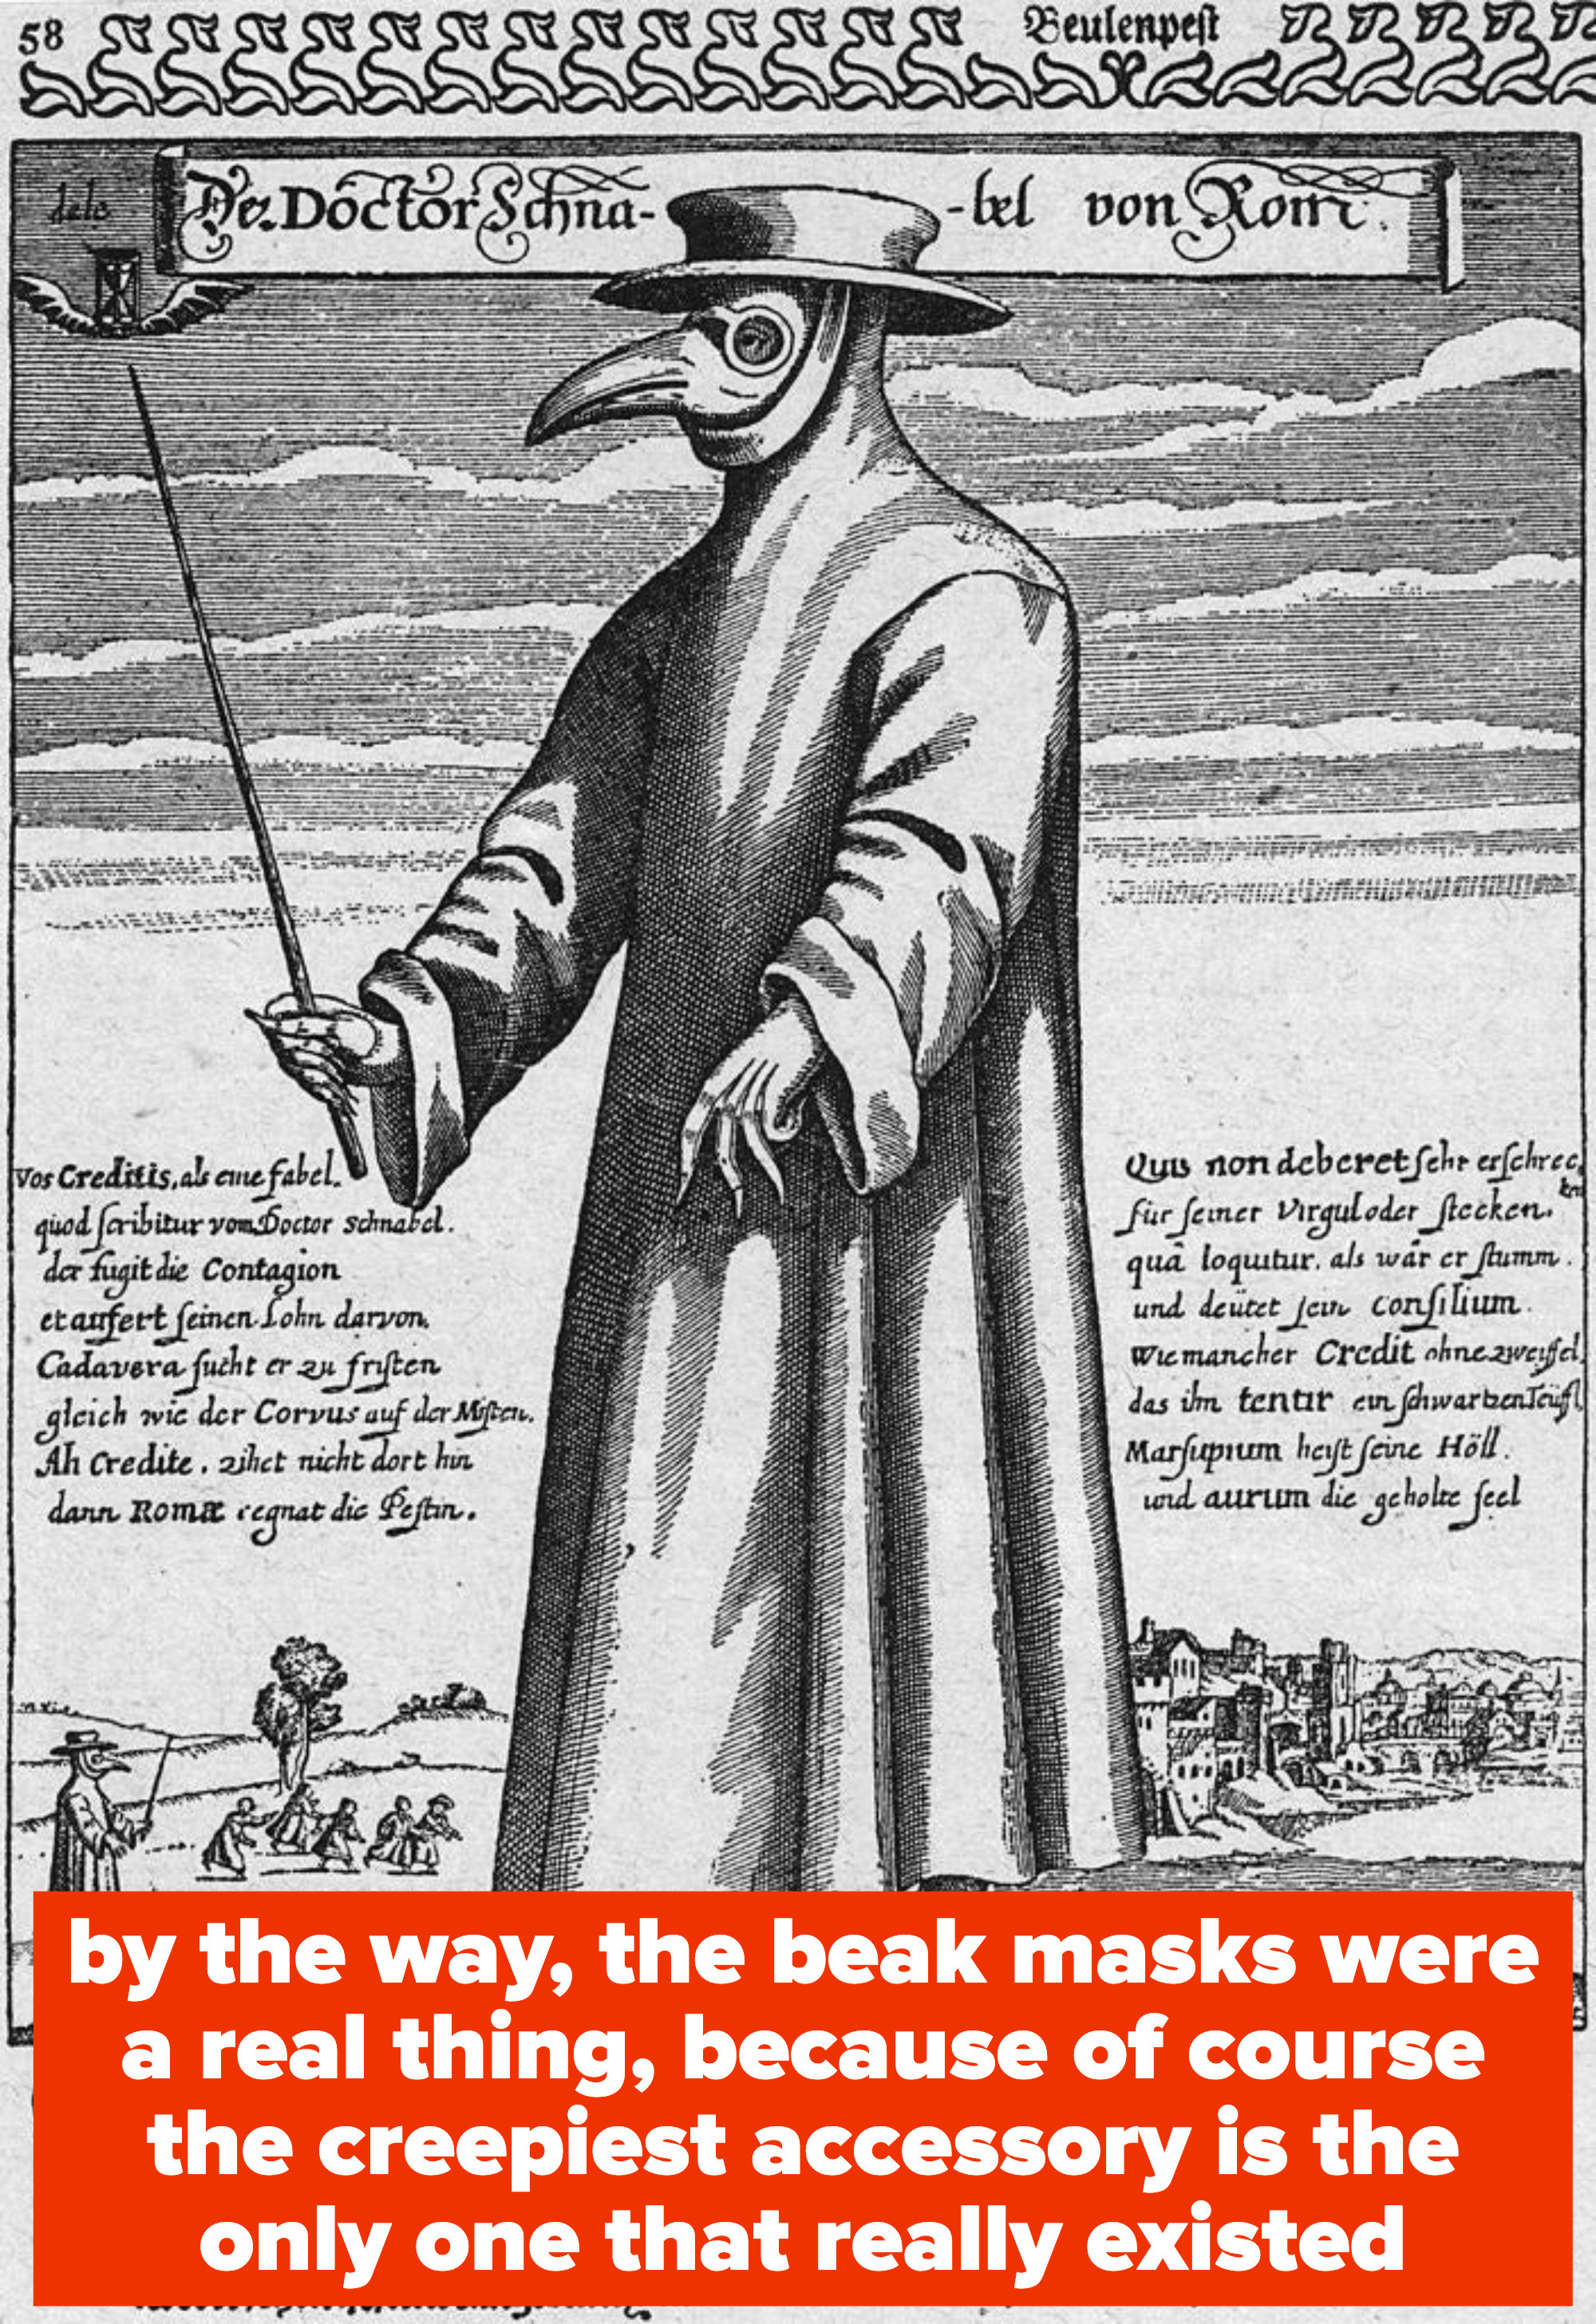 a plague doctor wearing a beaked mask, with caption: by the way, the beak masks were a real thing, because of course the creepiest accessory is the only one that really existed